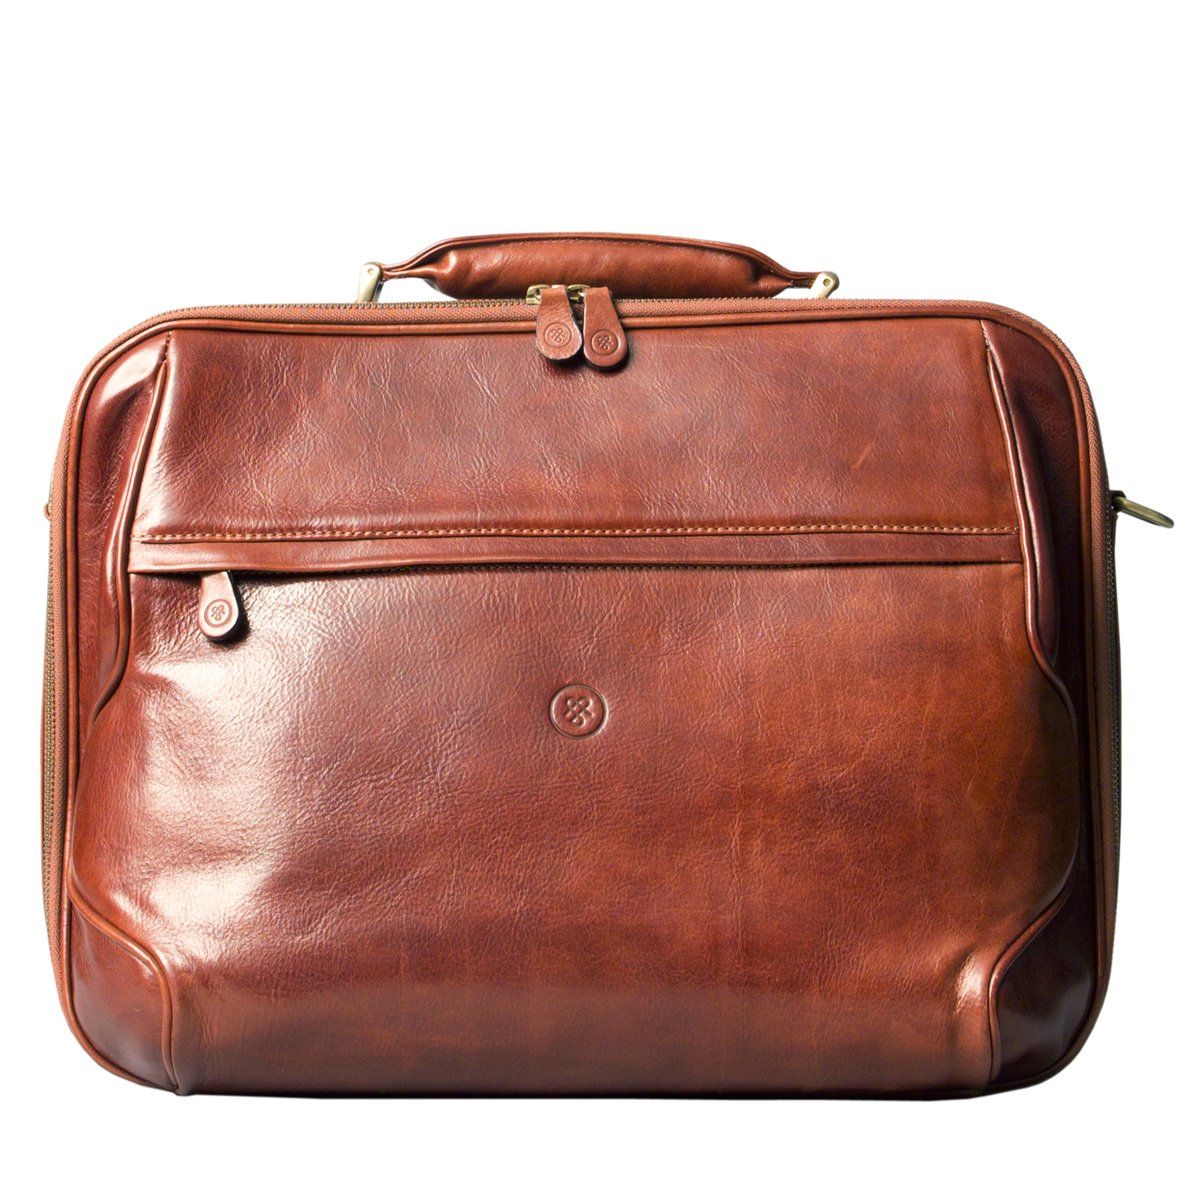 Luxury Leather Business Bag For Men, 25 Year Warranty